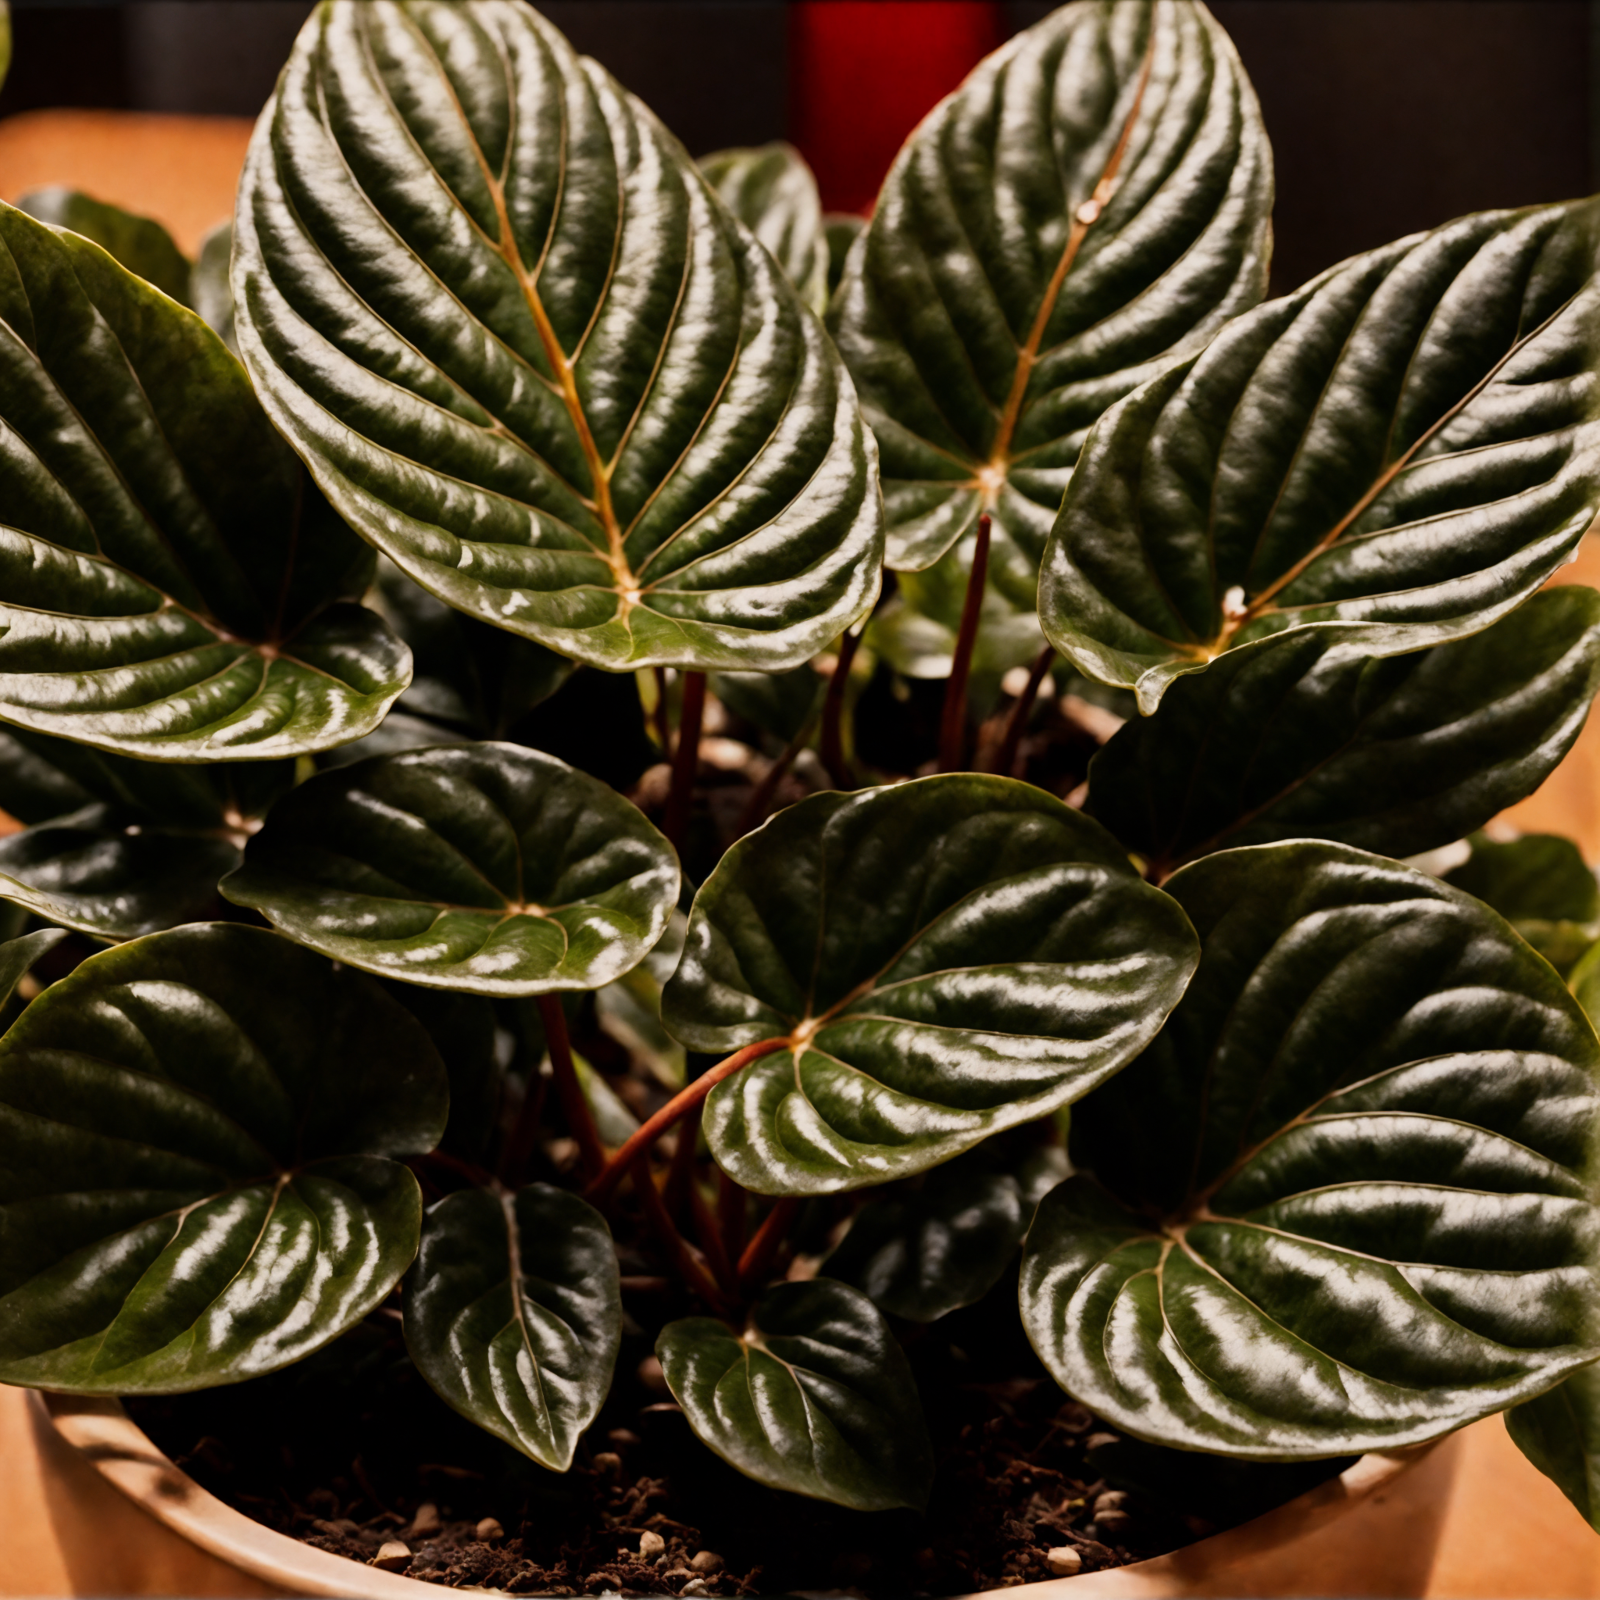 Peperomia caperata with textured leaves in a bowl planter, clear indoor lighting, against a dark background.